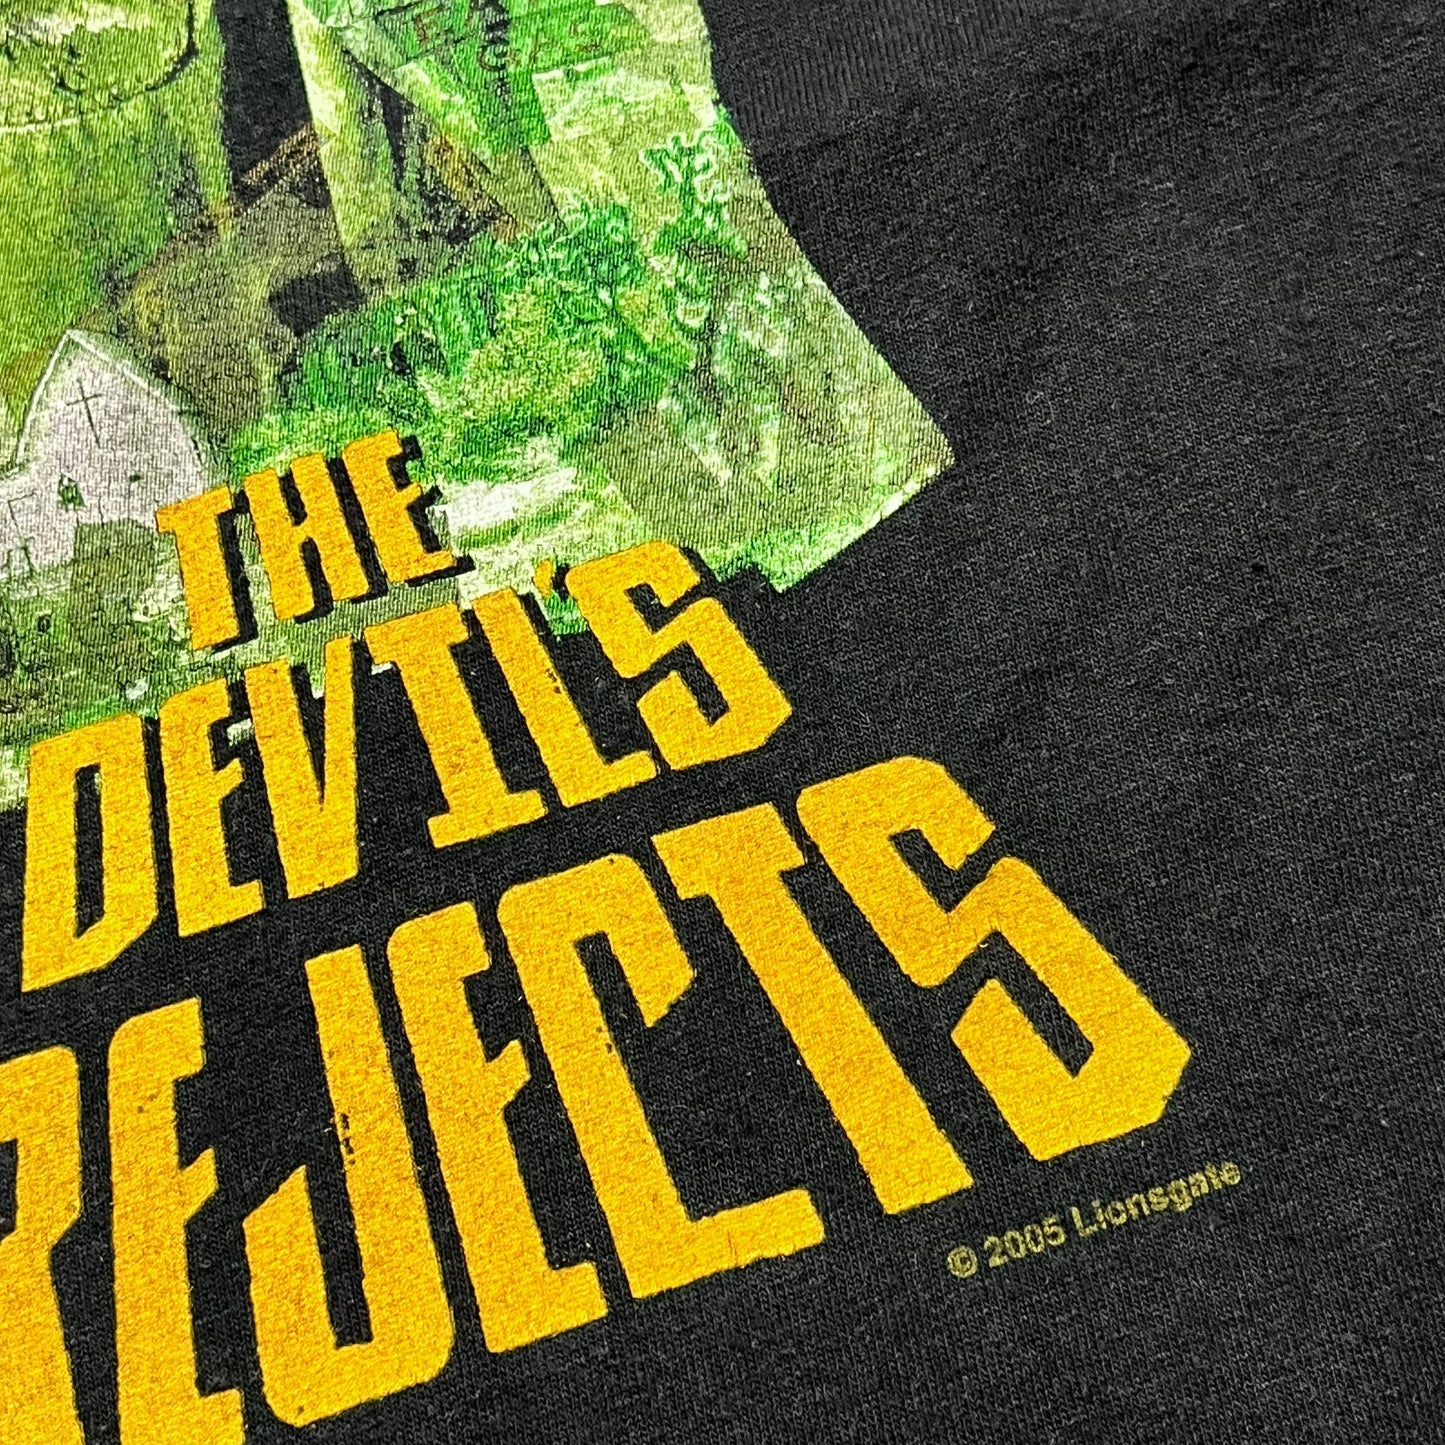 2005 The Devil’s Rejects Movie Promo Tee / XL